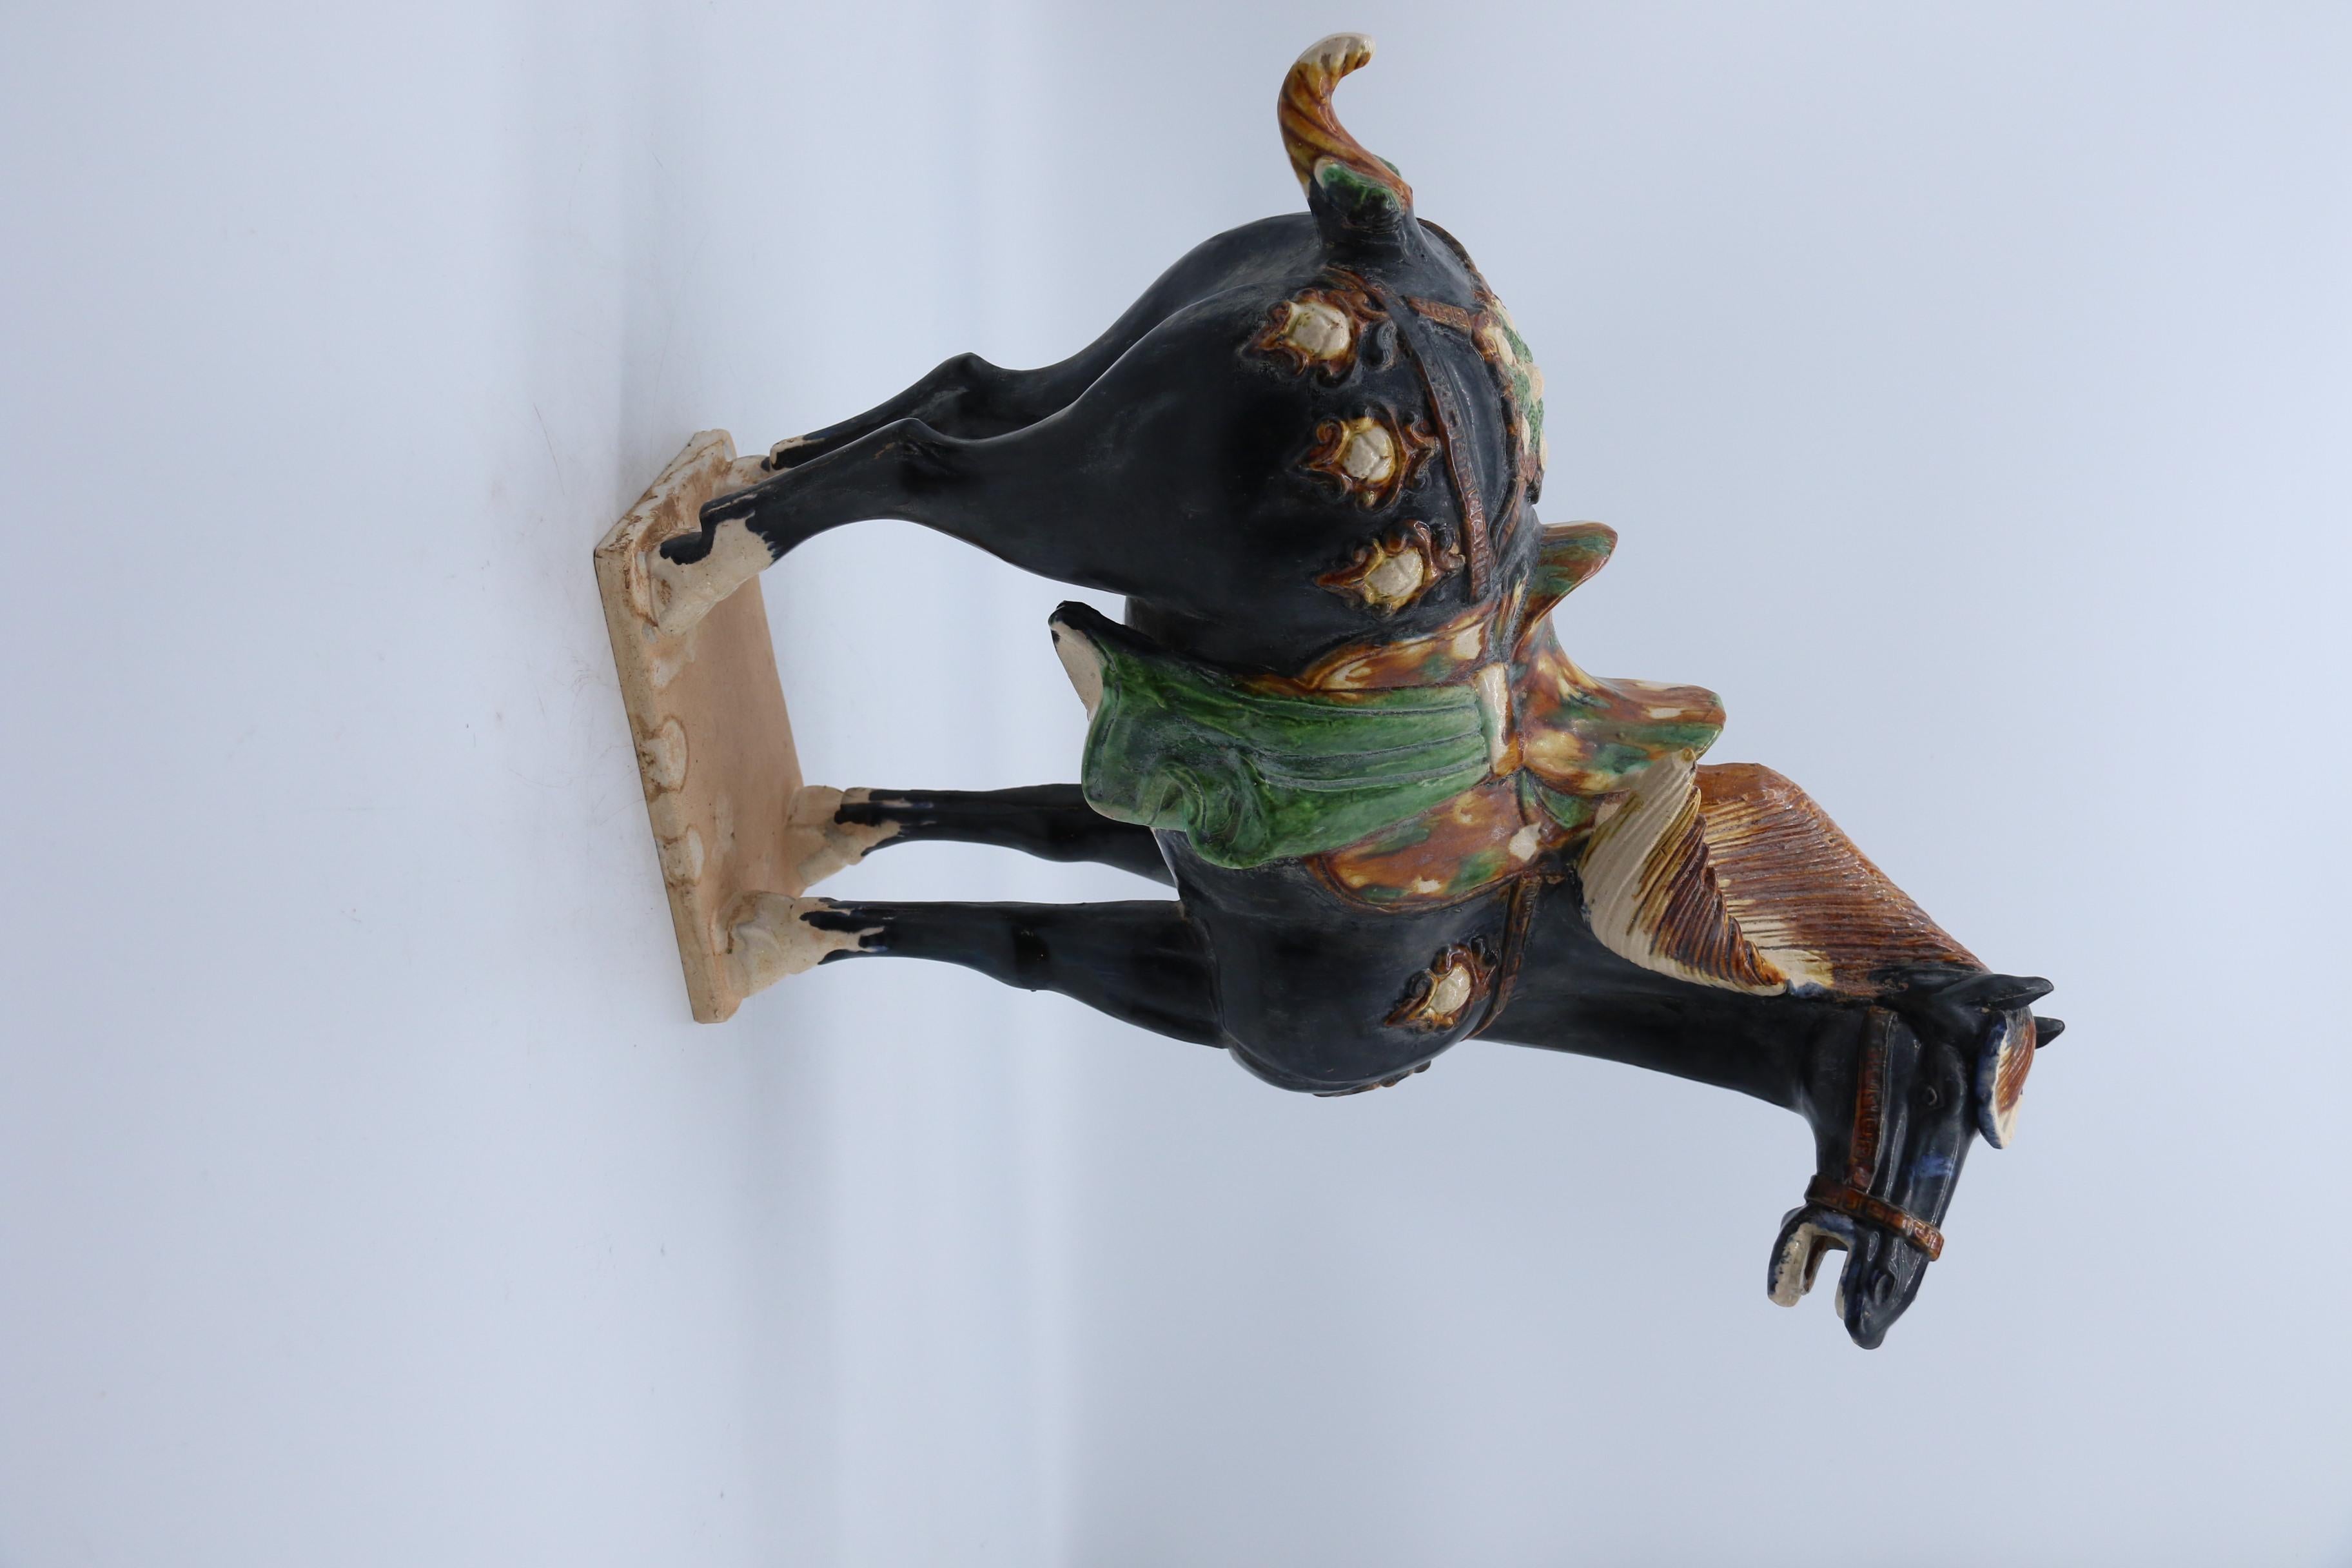 True in all its elements to the original examples which date from the early Chinese Tang period. The black glazed horse is naturalistically modelled. It stands on a rectangular base with a detailed mane, tail and hooves. The head is well defined